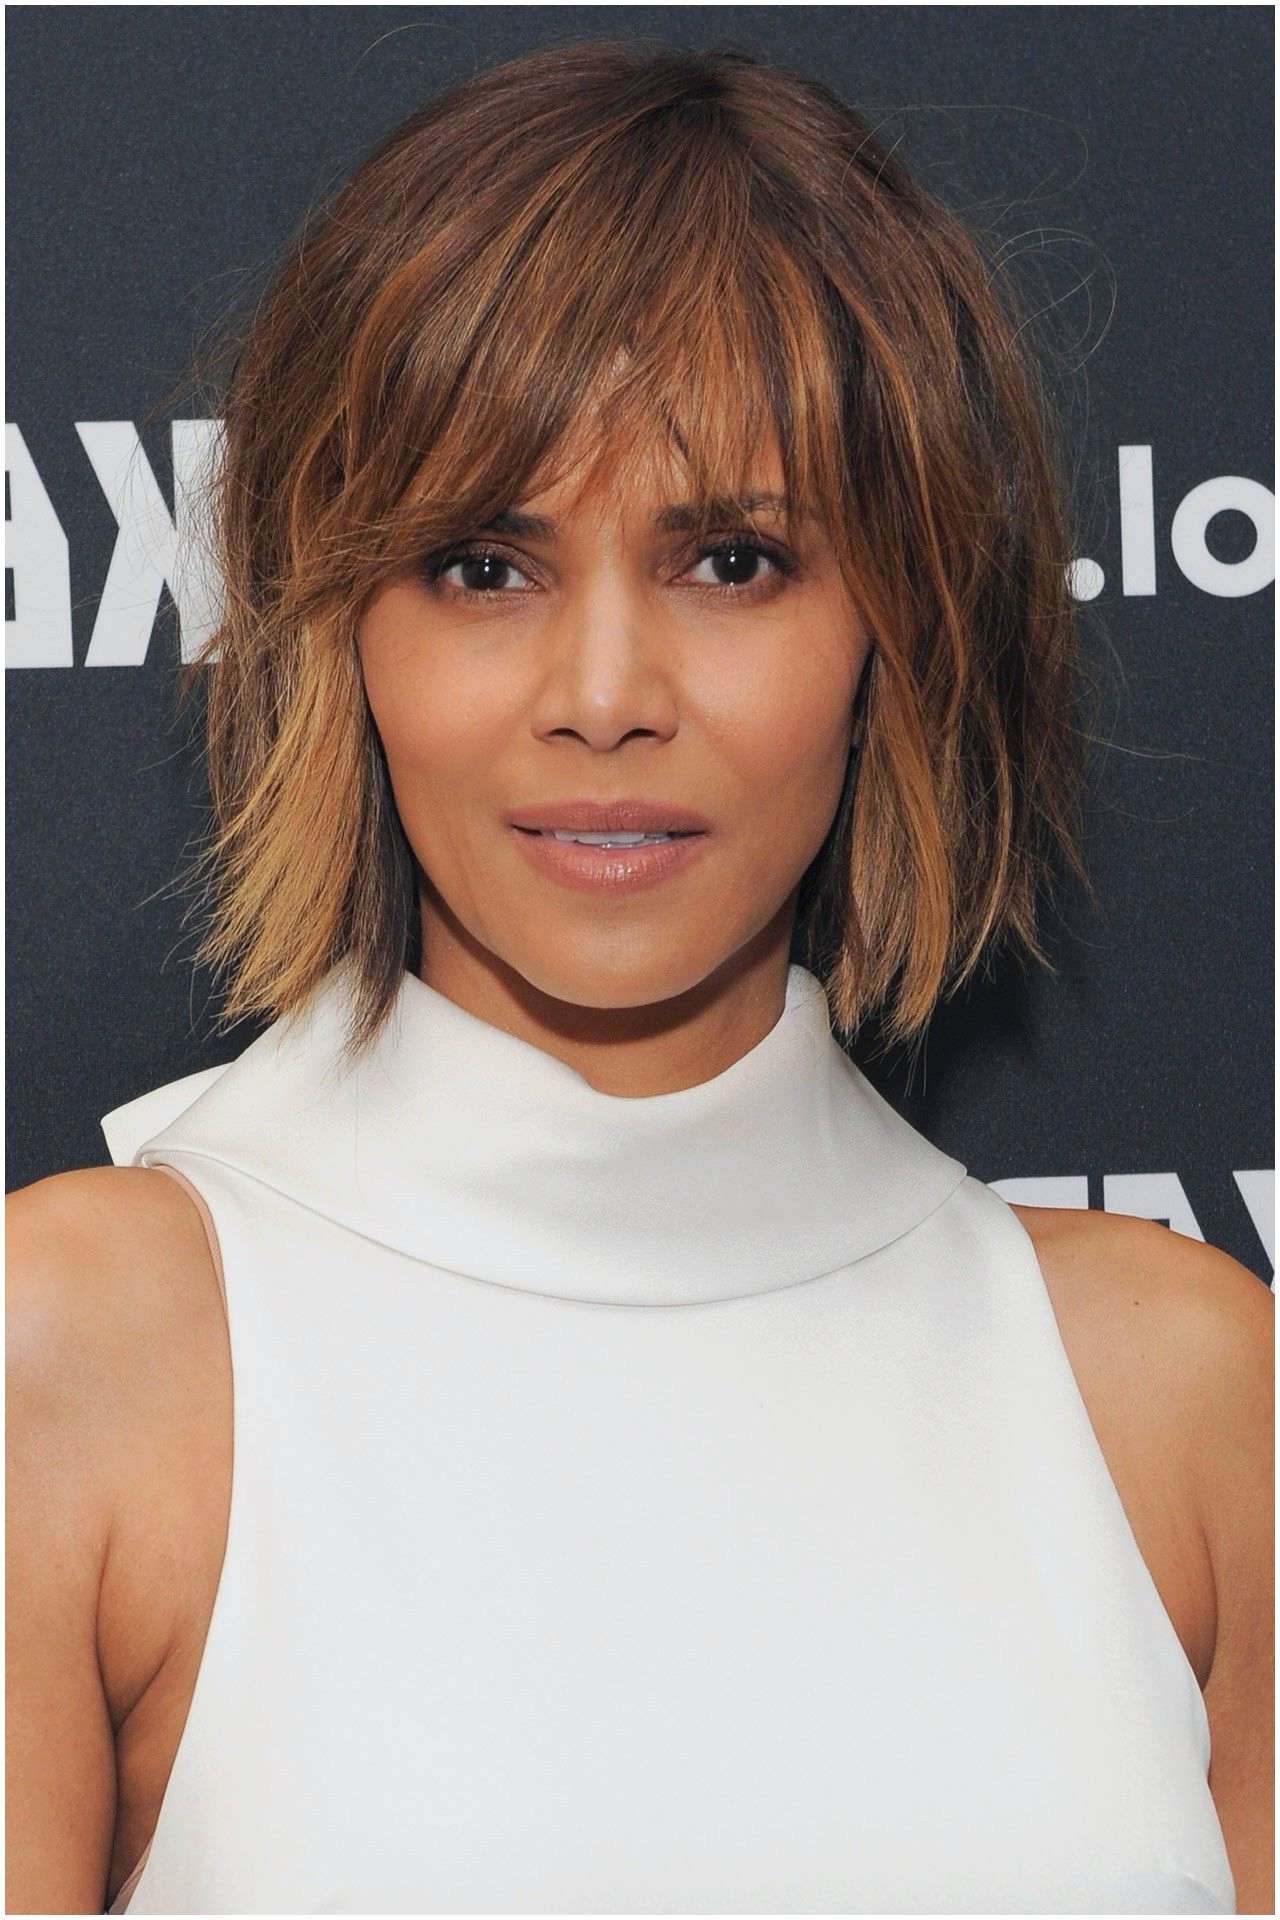 New J Lo Just Made The Grown Out Fringe The Hottest Hairstyle Of The Intended For Best And Newest Medium Haircuts Without Bangs (View 13 of 20)